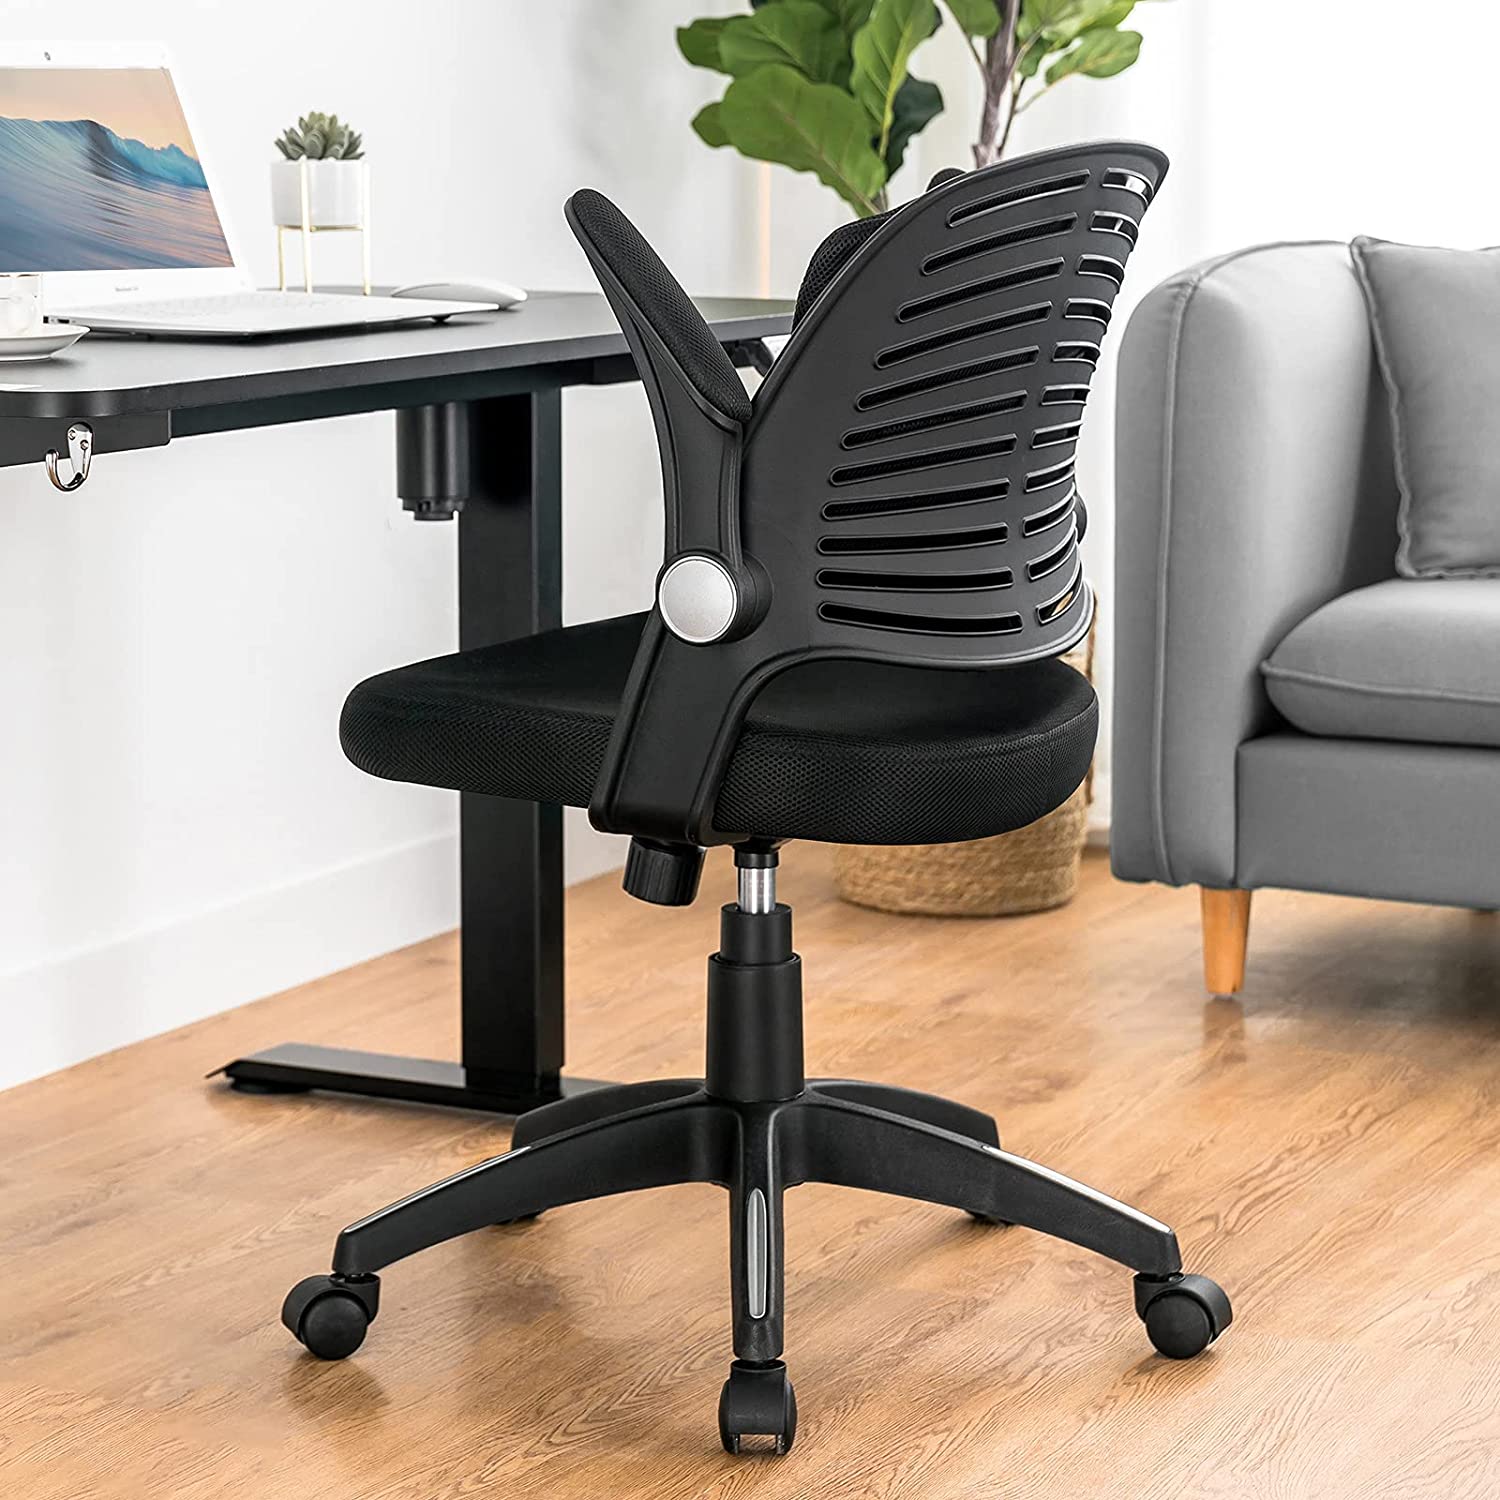 COMHOMA Ergonomic Mesh Office Chair, Comfortable Mid Back Home Task Chair with Flip-up Armrest, White and black from $50.99-55.24 + FS